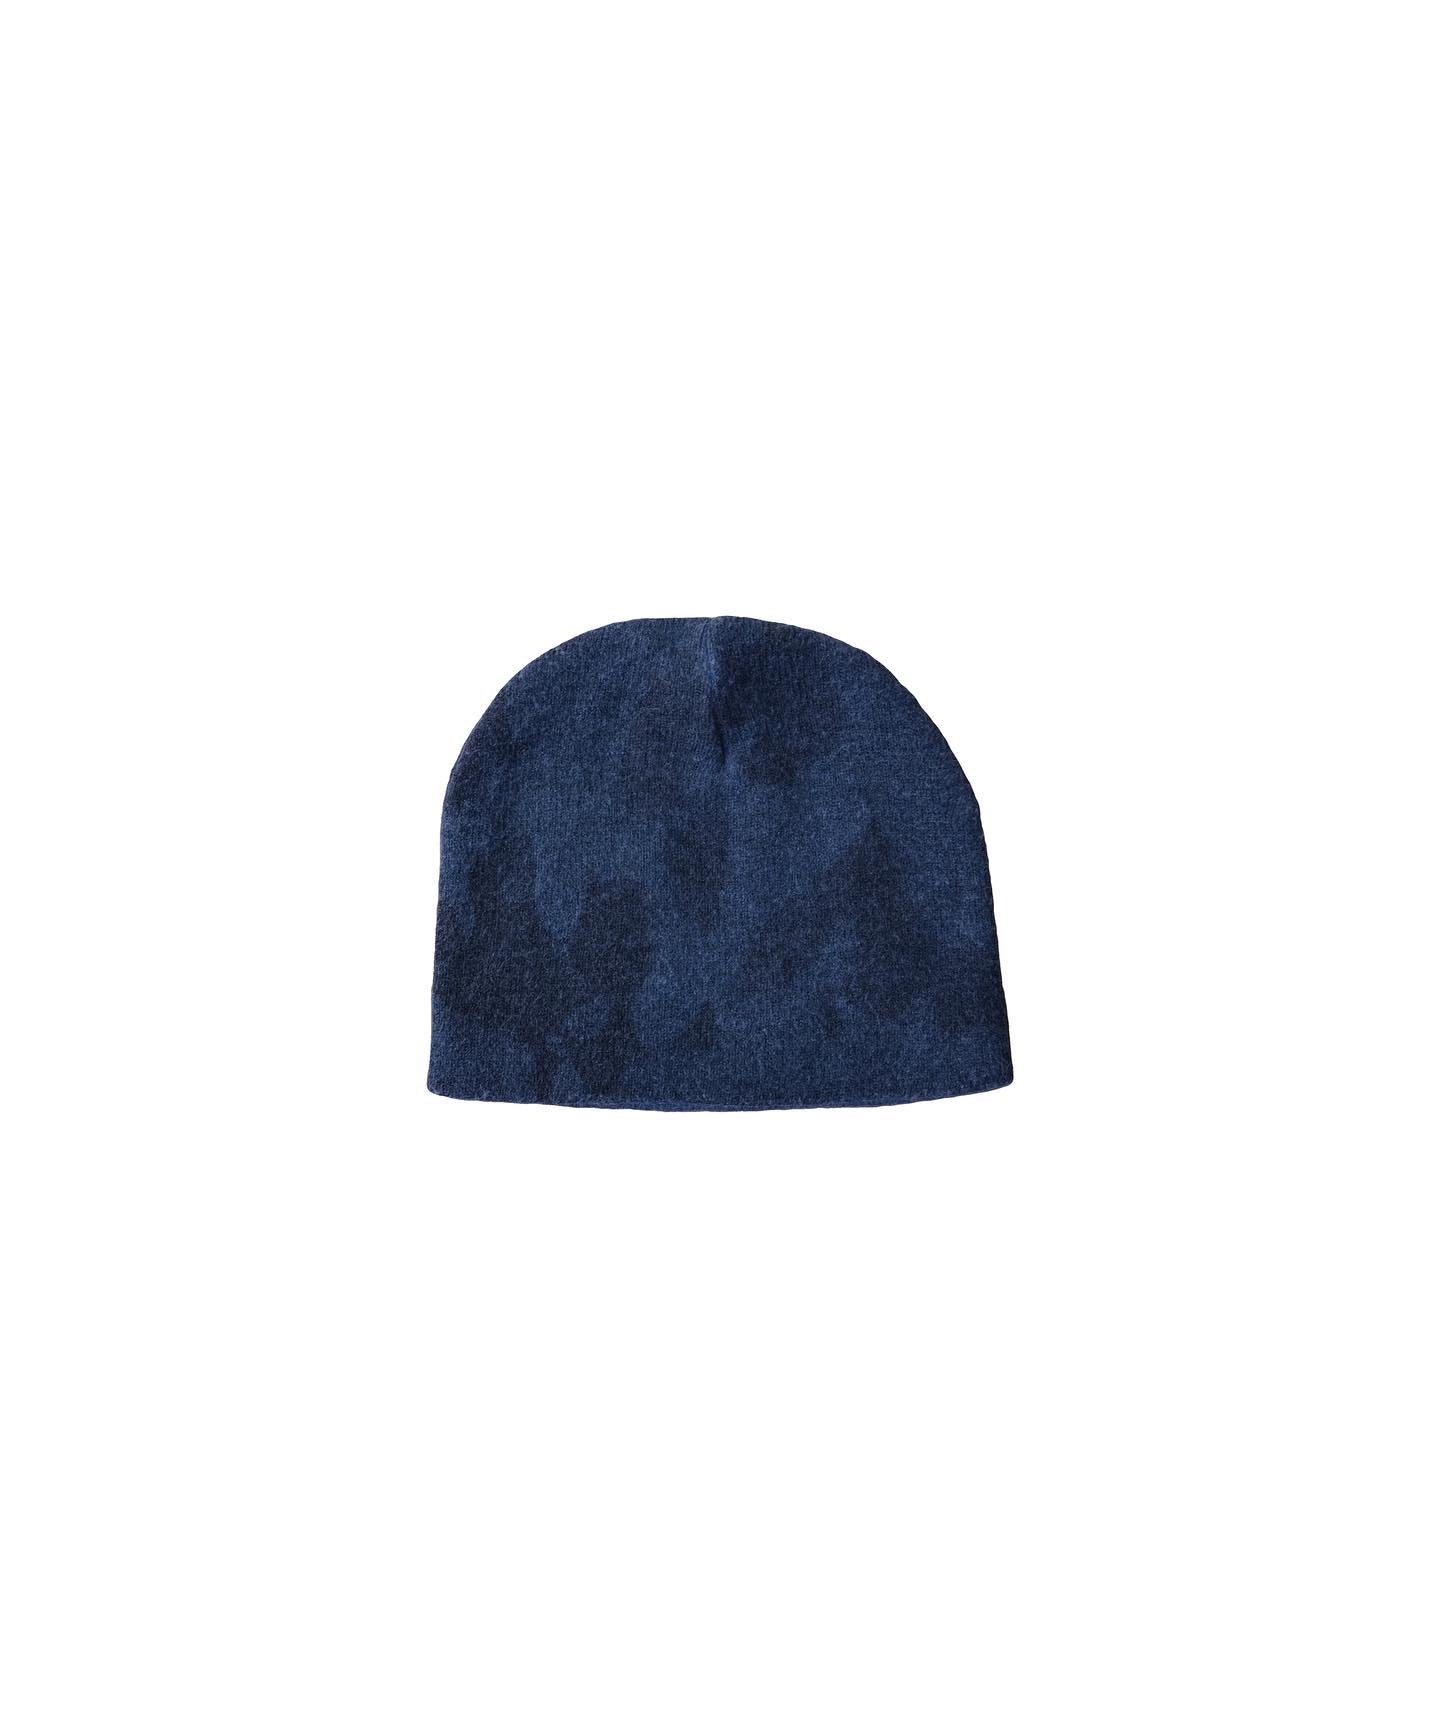 CHAMBRAY BLUE STAINED BEANIE